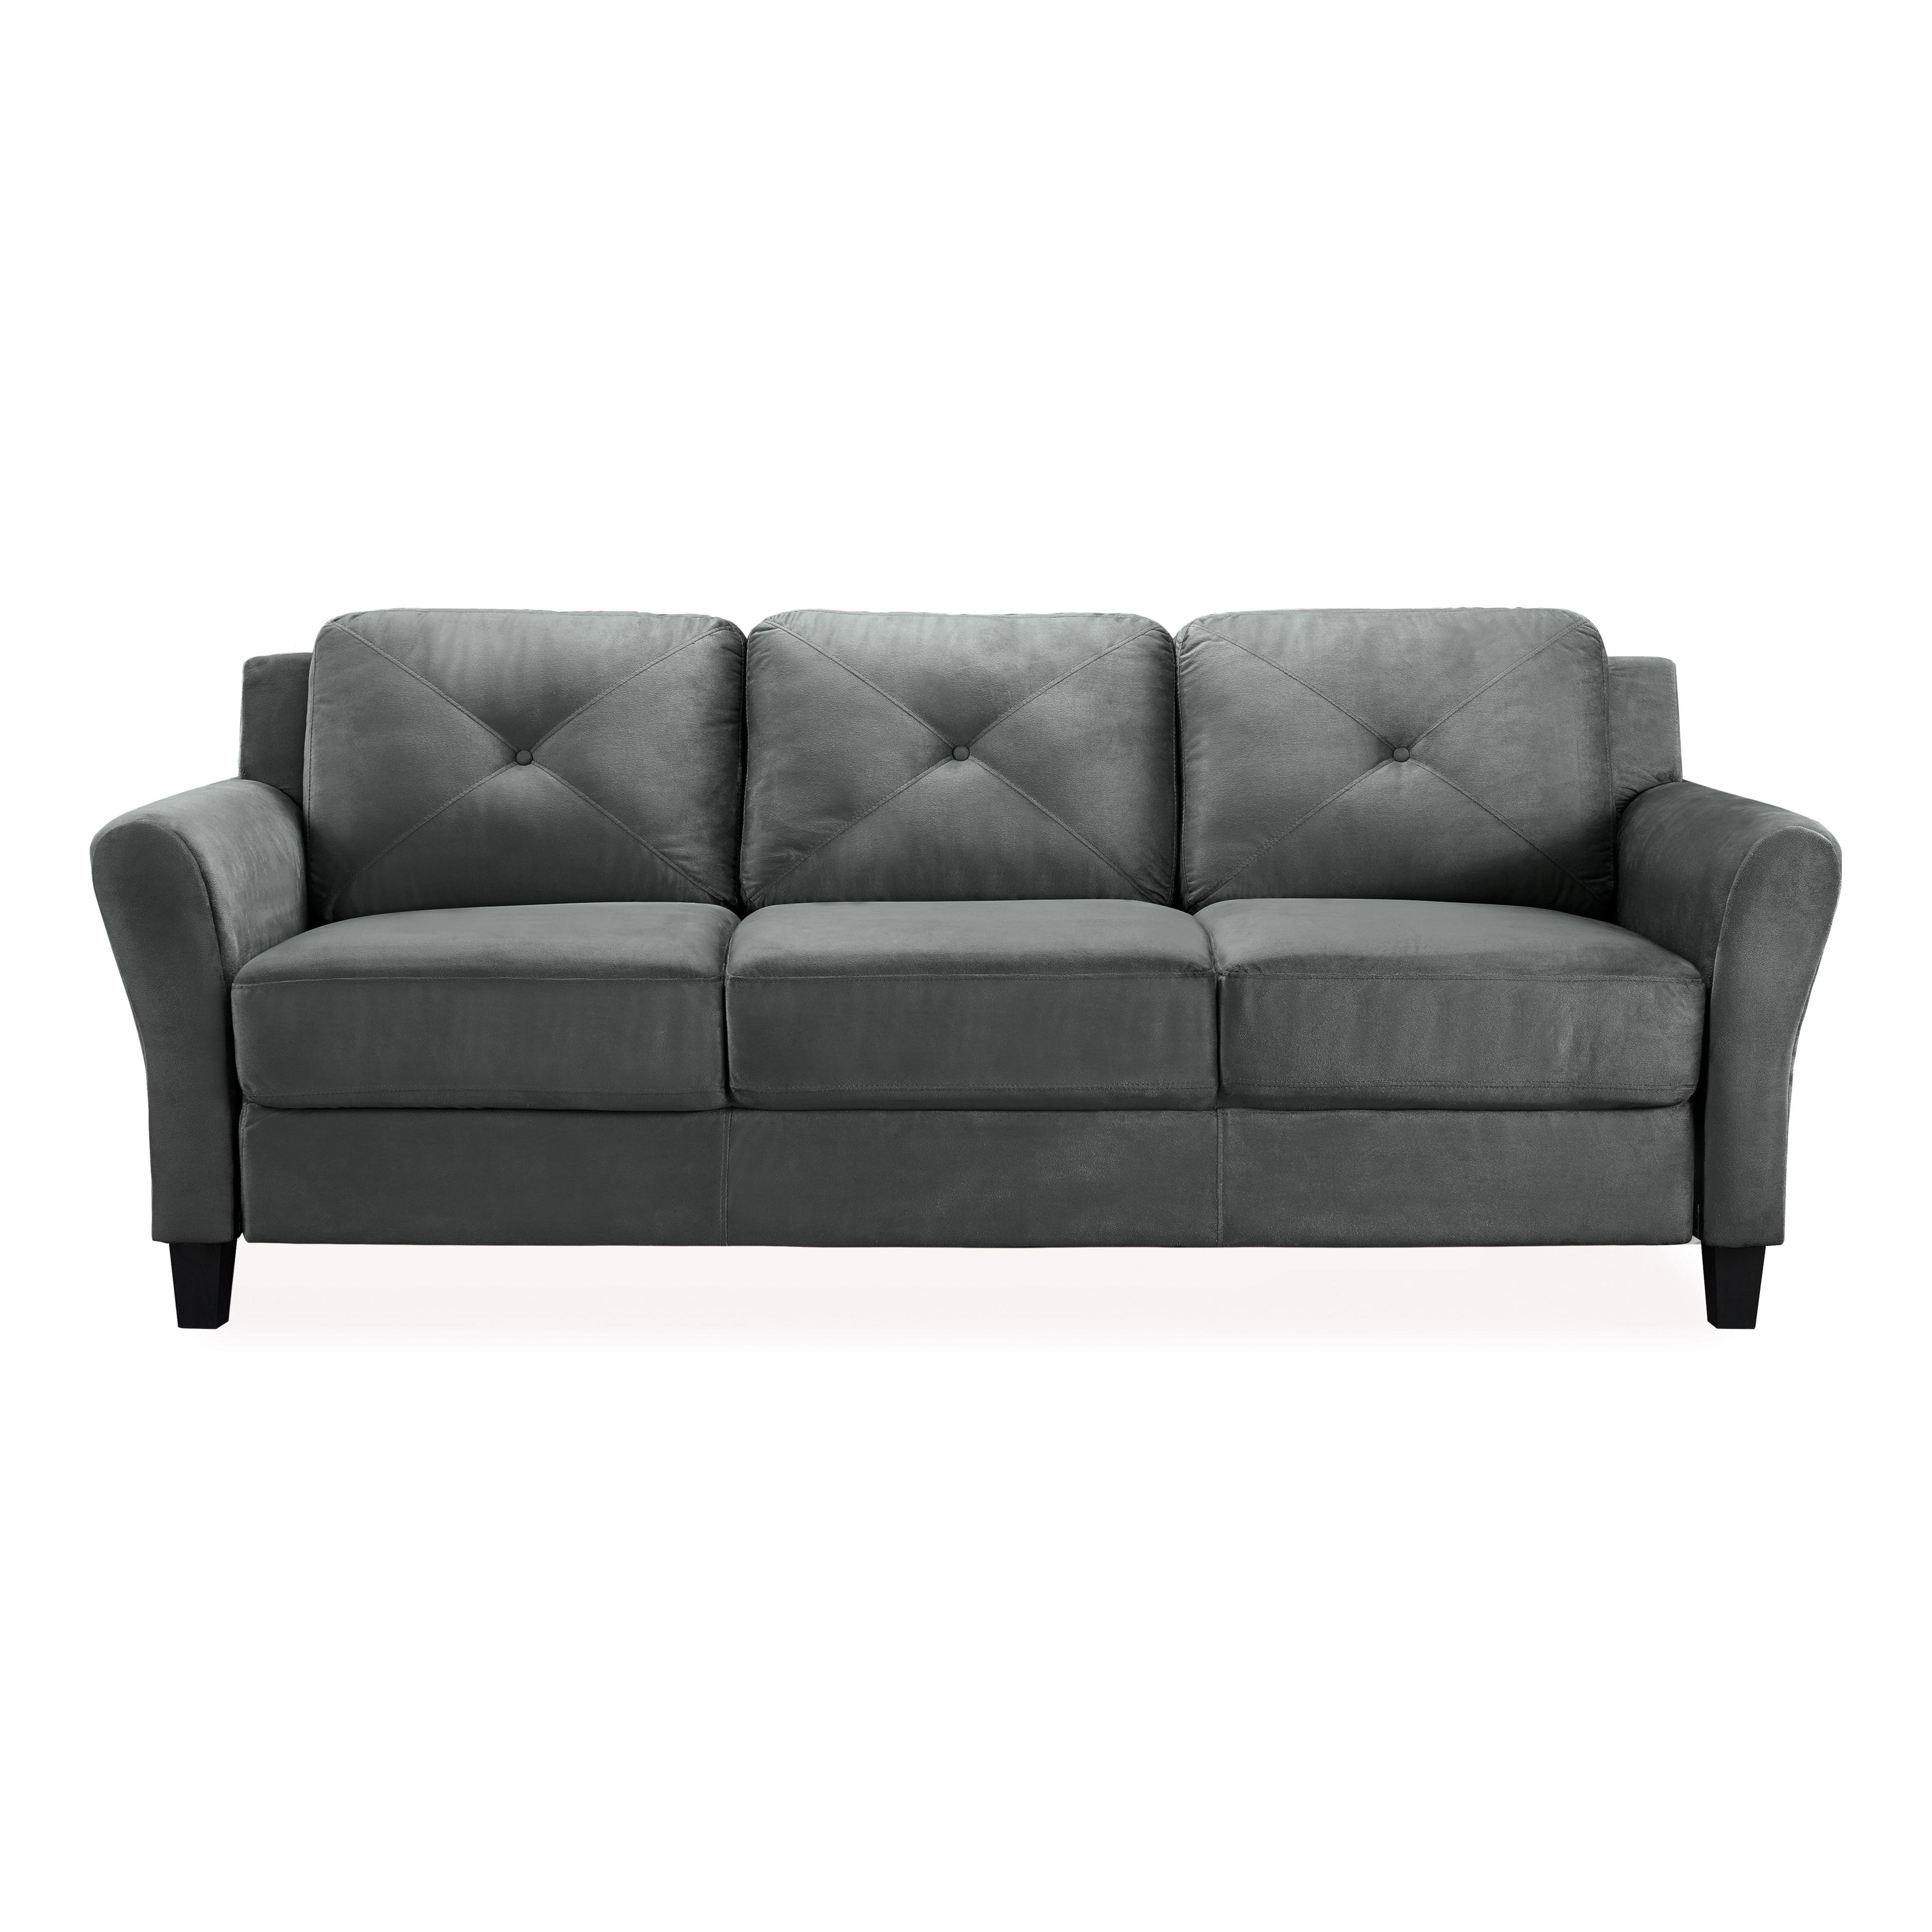 Elysian Tufted Dark Gray Microfiber Sofa with Rolled Arms